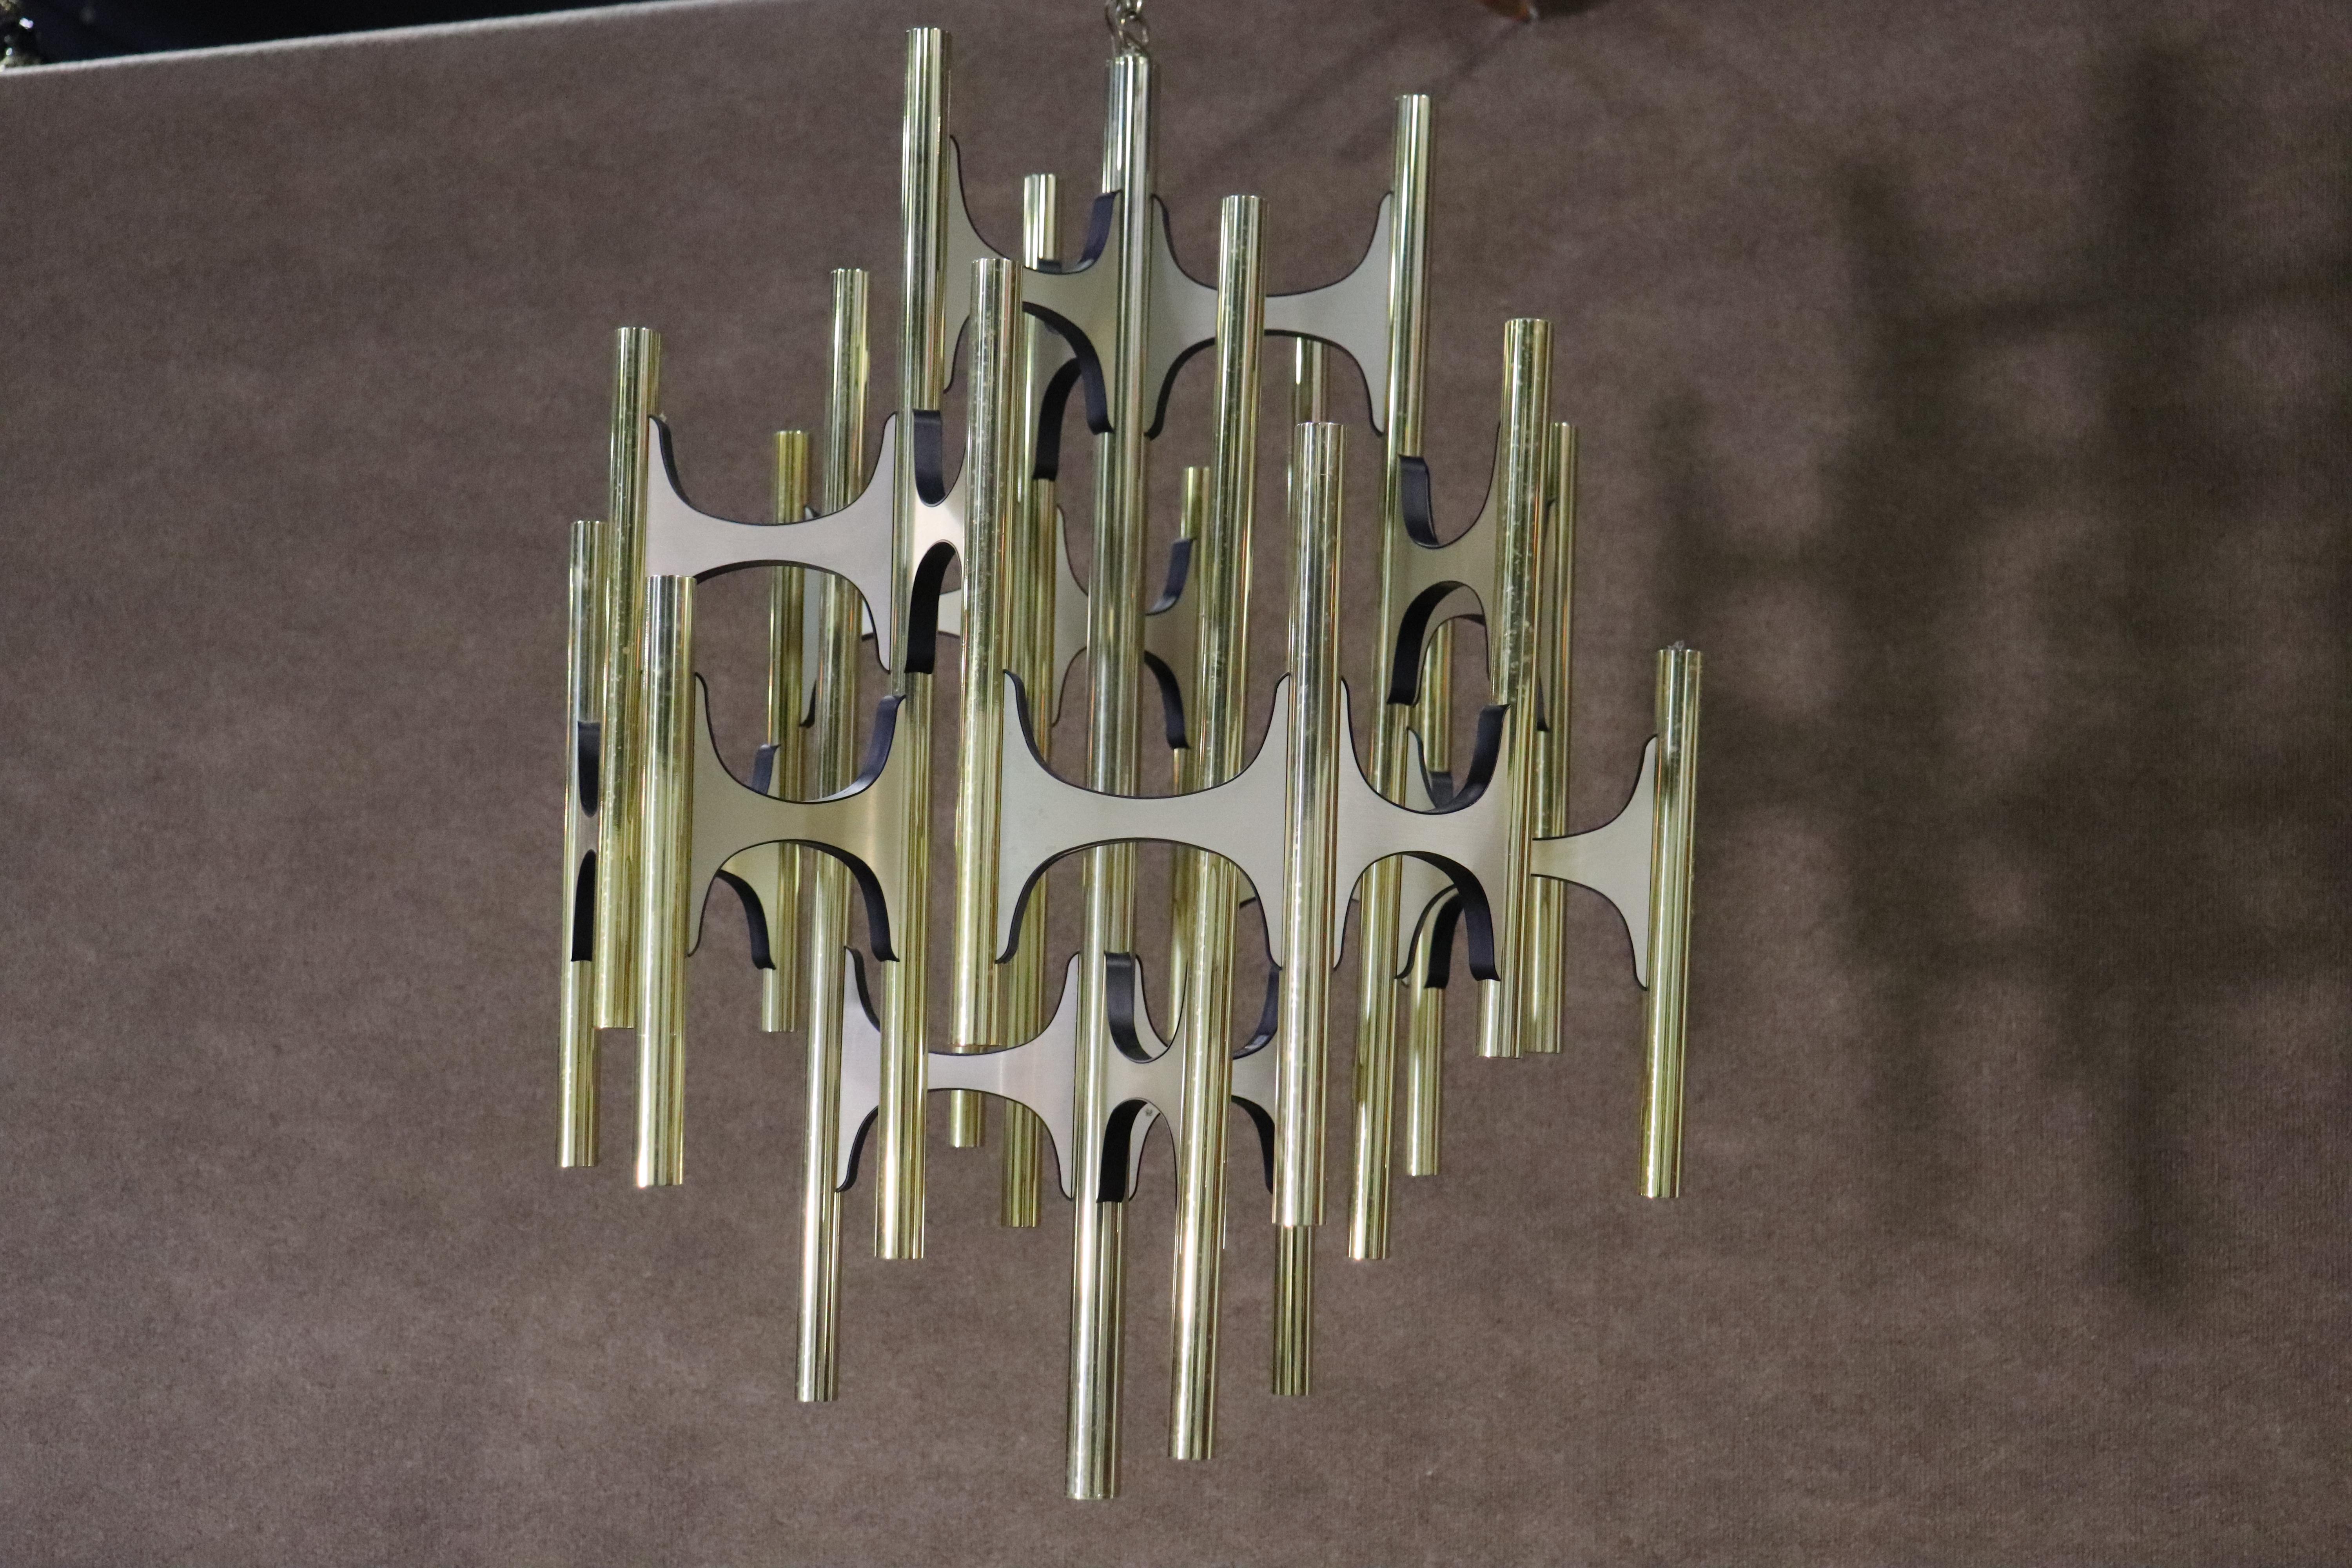 Stunning mid-century modern chandelier with gold and silver combination. Up and down lighting to illuminate your home.
Please confirm location NY or NJ